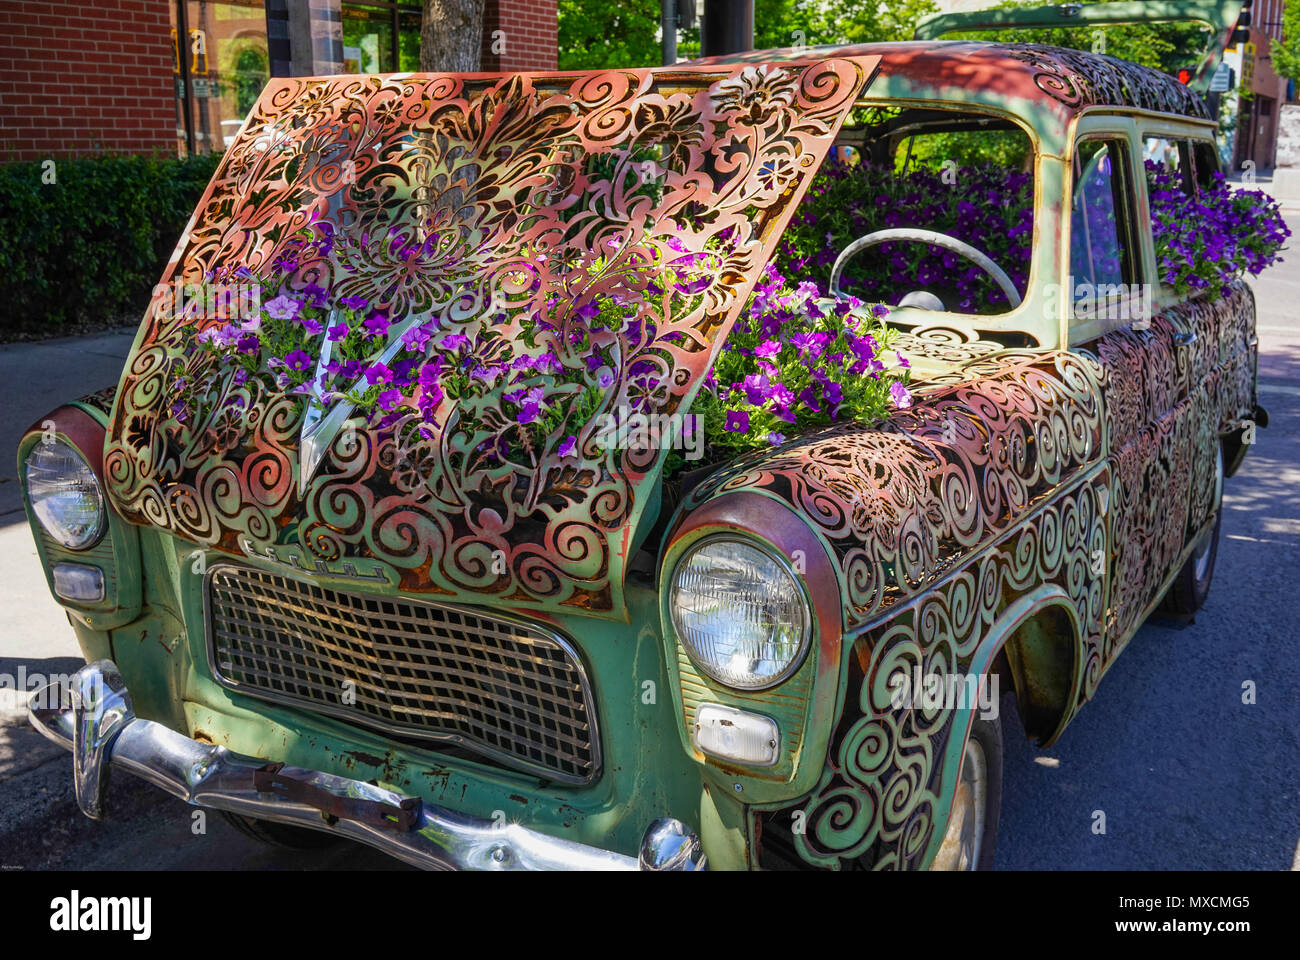 Downtown in Bozeman, Montana  saw this old car with floowers growing out of it. A piece of permanent art on the nain high street there. Stock Photo